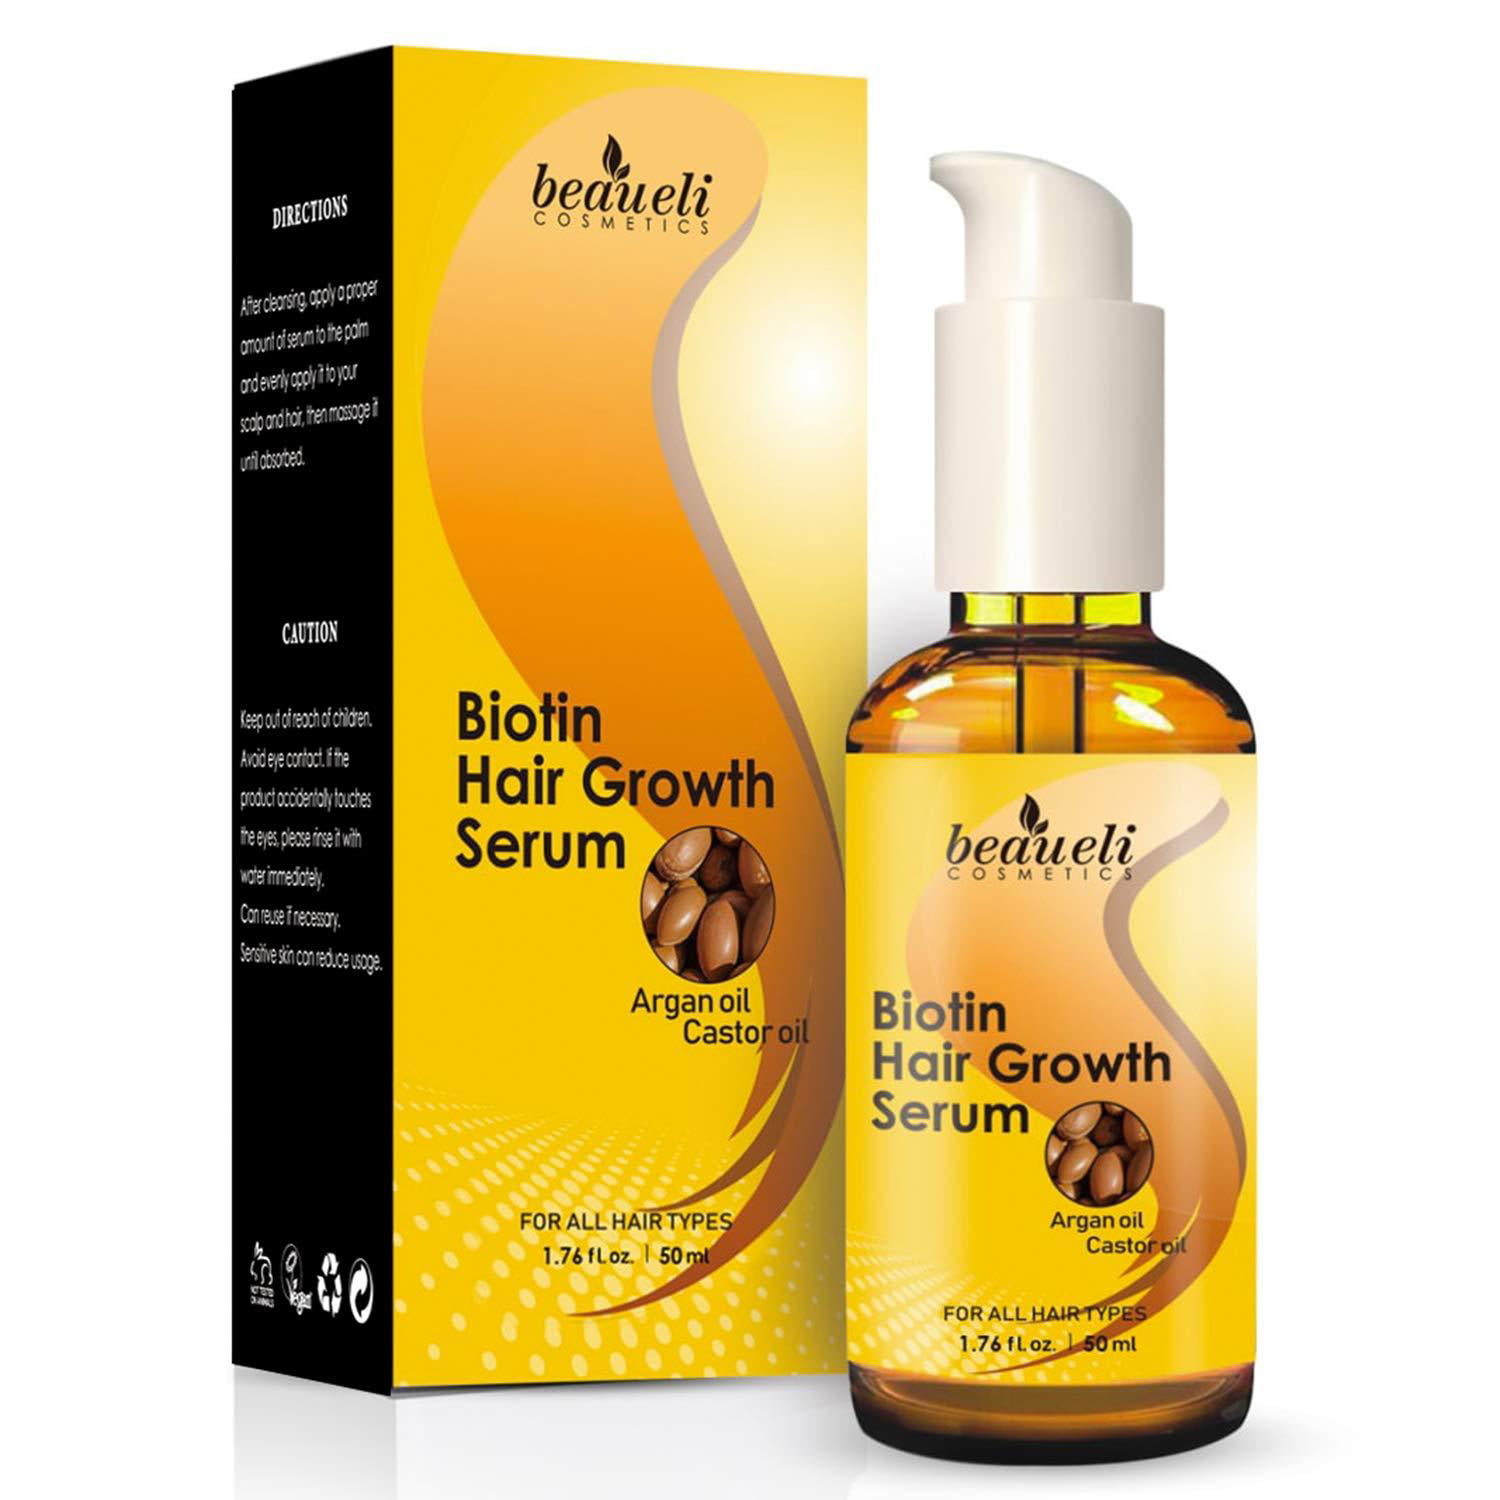 Biotin Hair Growth Serum with Castor Oil, Argan Oil - Hair Loss Prevention  Treatment with fine thinning hair Formula to Help Grow Healthy Thicker Strong  Hair for Men & Women By Beaueli -